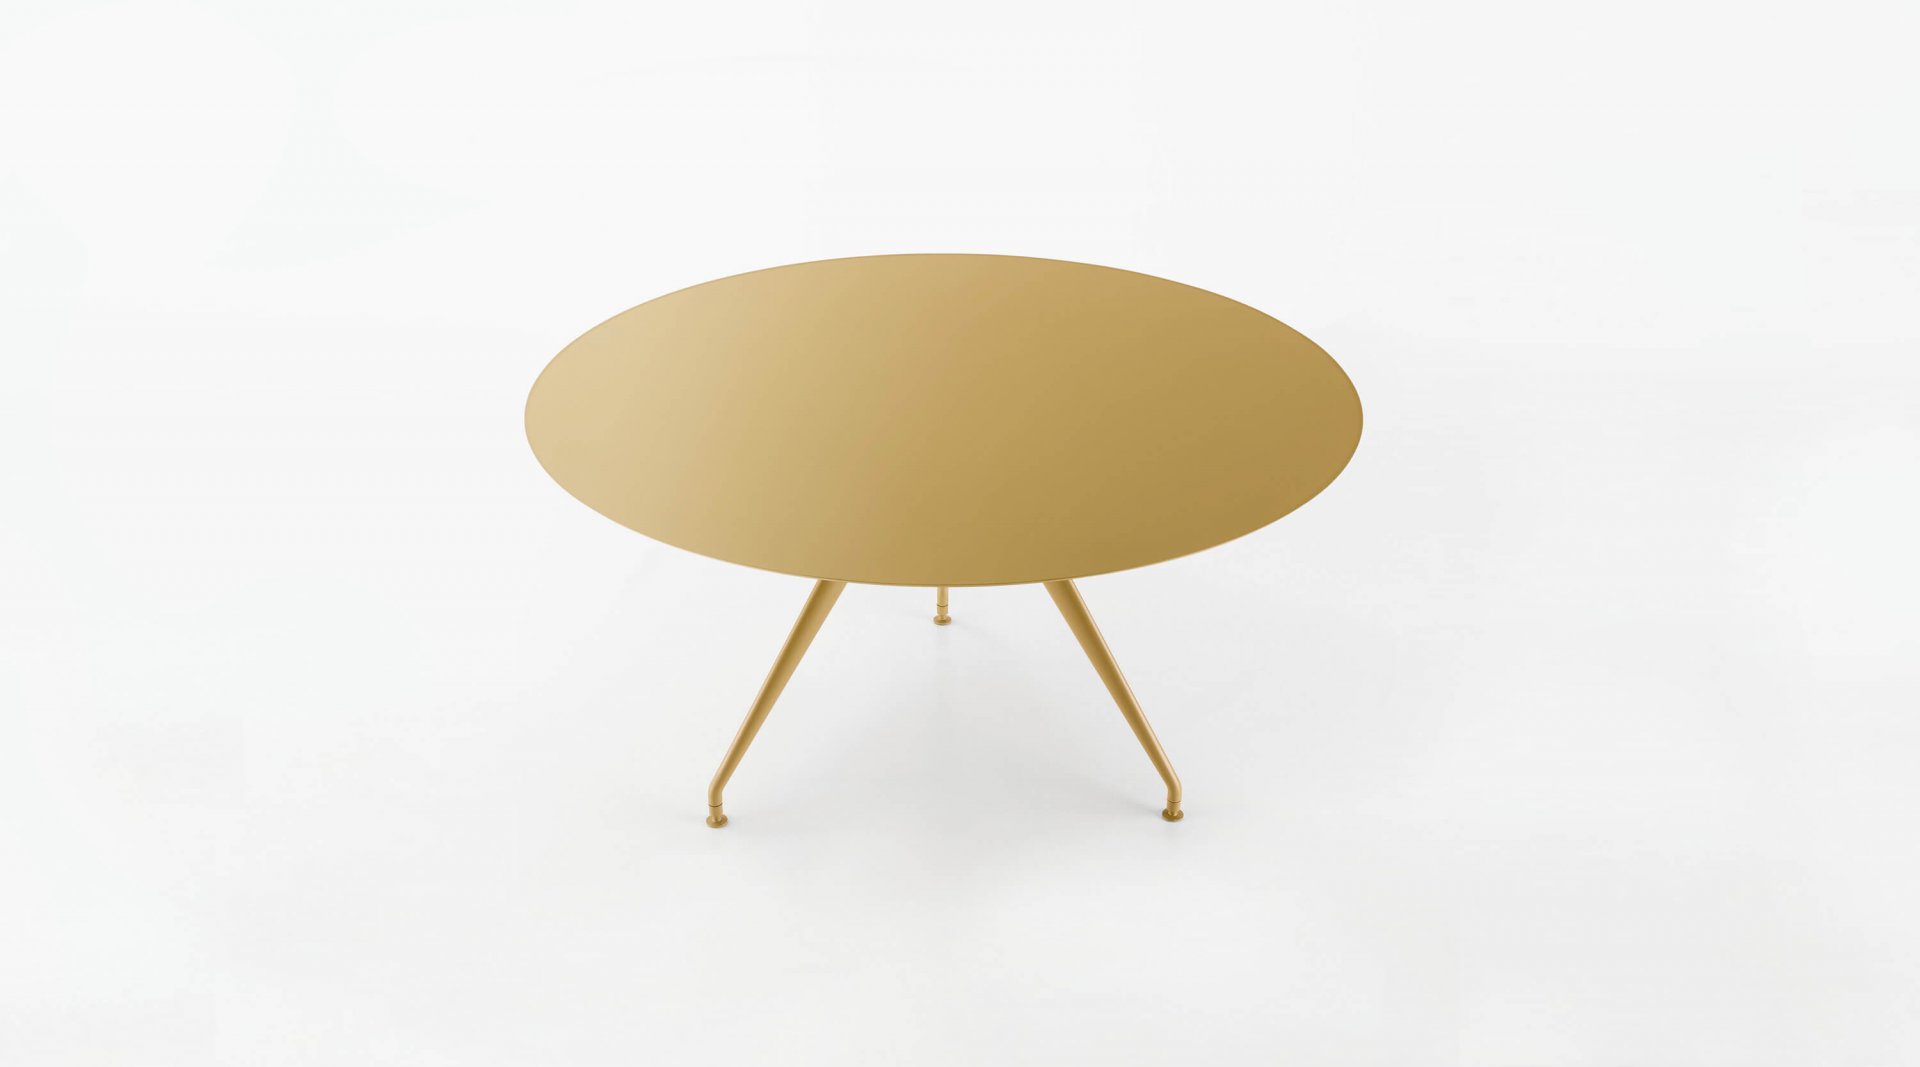 Manta table in round version with lacquered glass